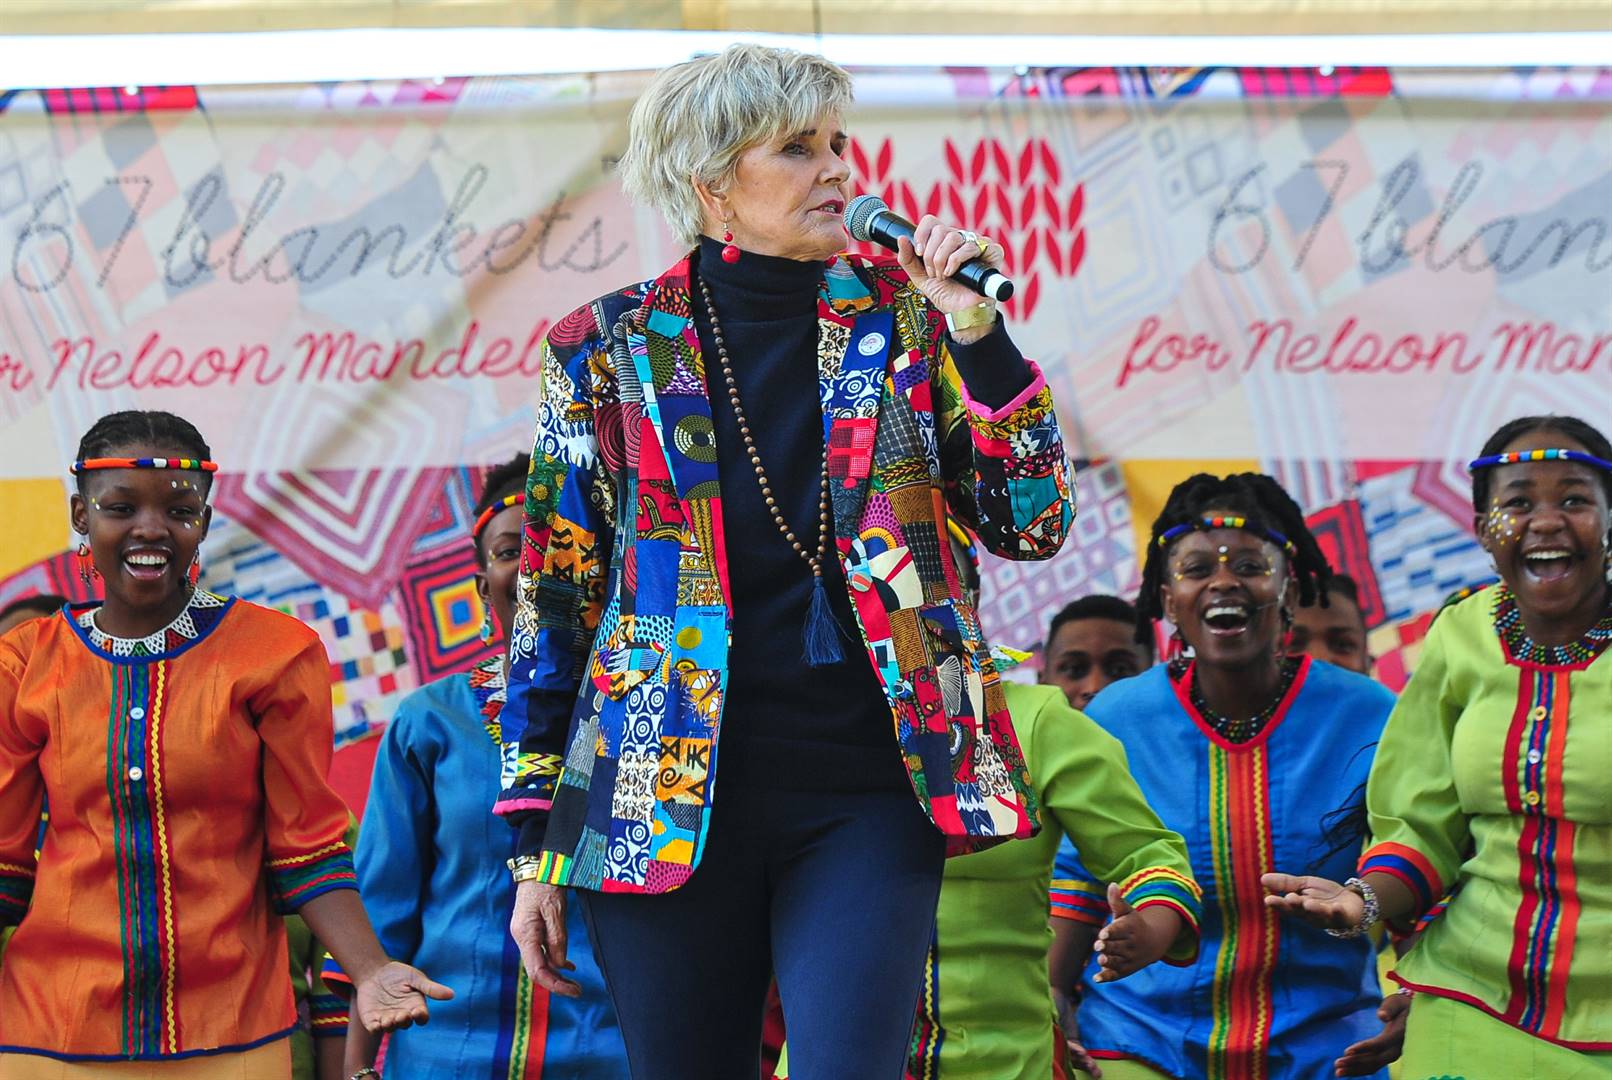 The legendary musician PJ Powers performed the song Bayete with the Mzanzi Youth Choir perform at the blankets reveal event. Mzansi Youth Choir performed a new song dedicated to the humanitarian organisation the Gift of the Givers, health workers and the 67 Blankets for Nelson Mandela Day organisation at the reveal event at Steyn City in Midrand. Photo: Rosetta Msimango